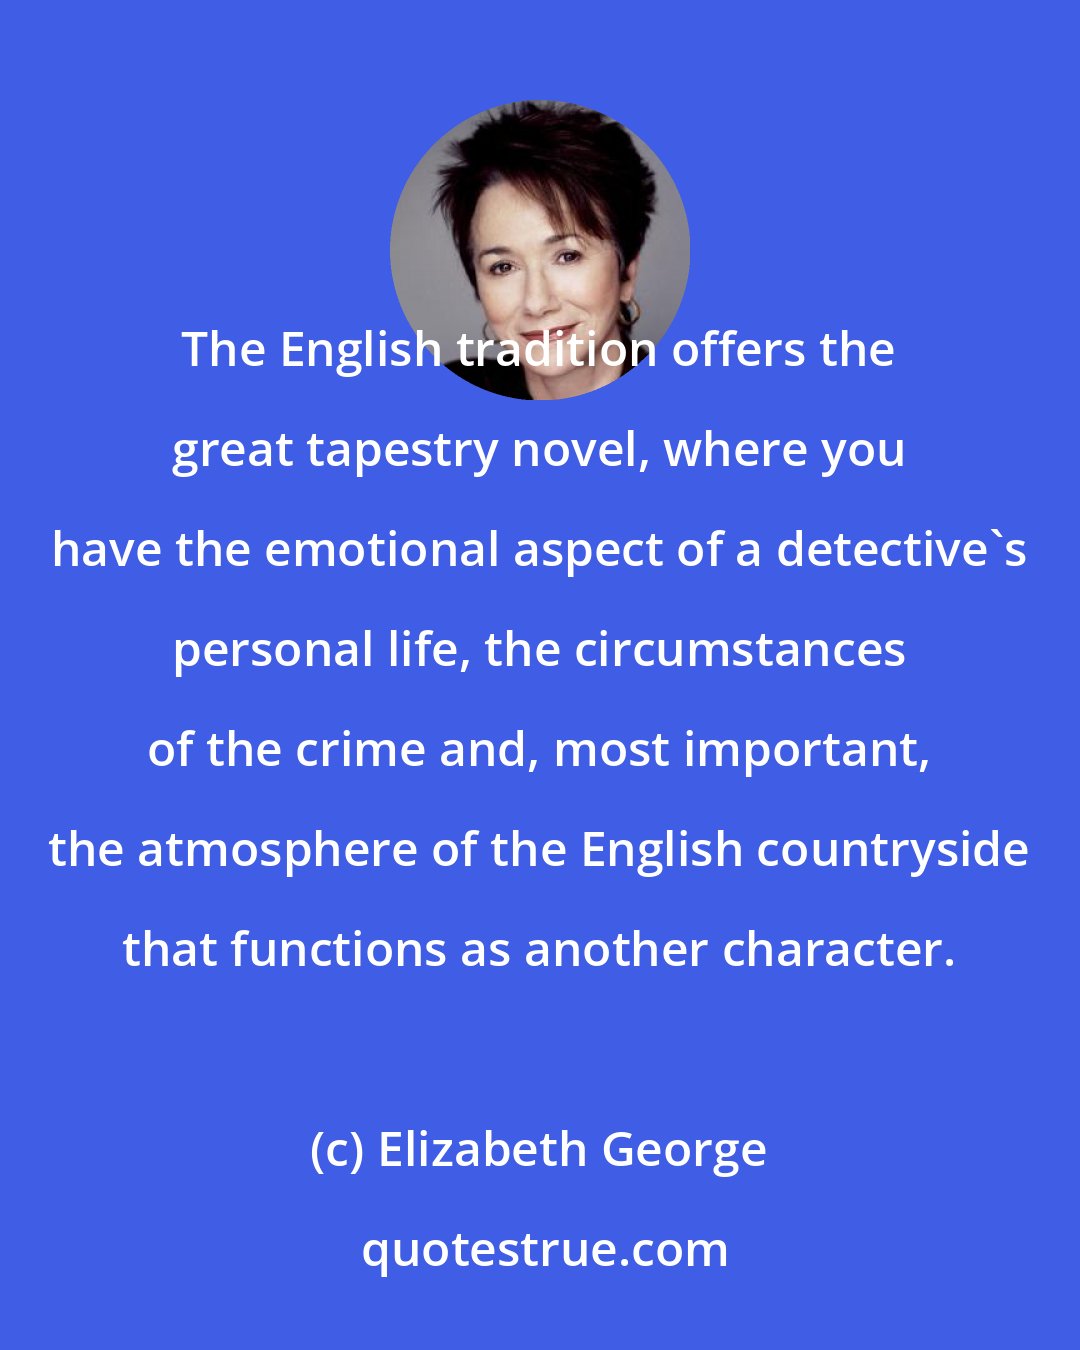 Elizabeth George: The English tradition offers the great tapestry novel, where you have the emotional aspect of a detective's personal life, the circumstances of the crime and, most important, the atmosphere of the English countryside that functions as another character.